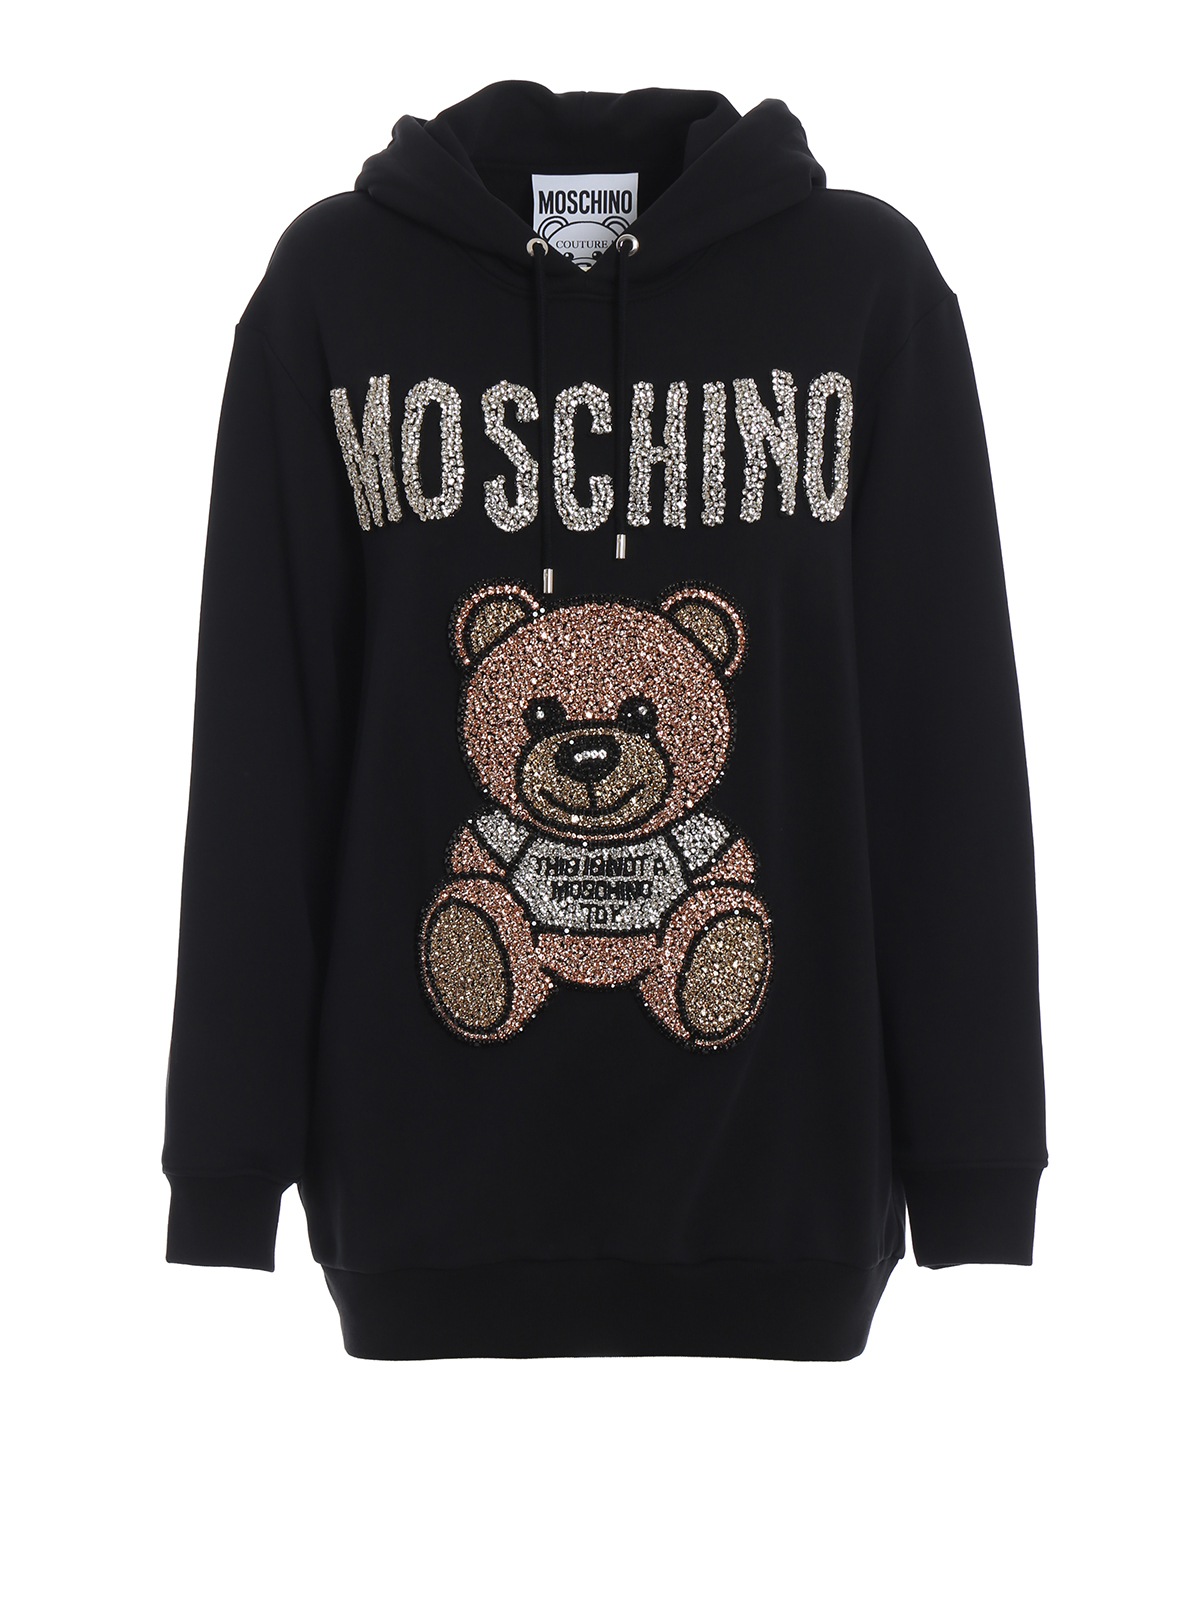 Moschino Teddy Sweatshirt Top Sellers, UP TO 59% OFF | agrichembio.com